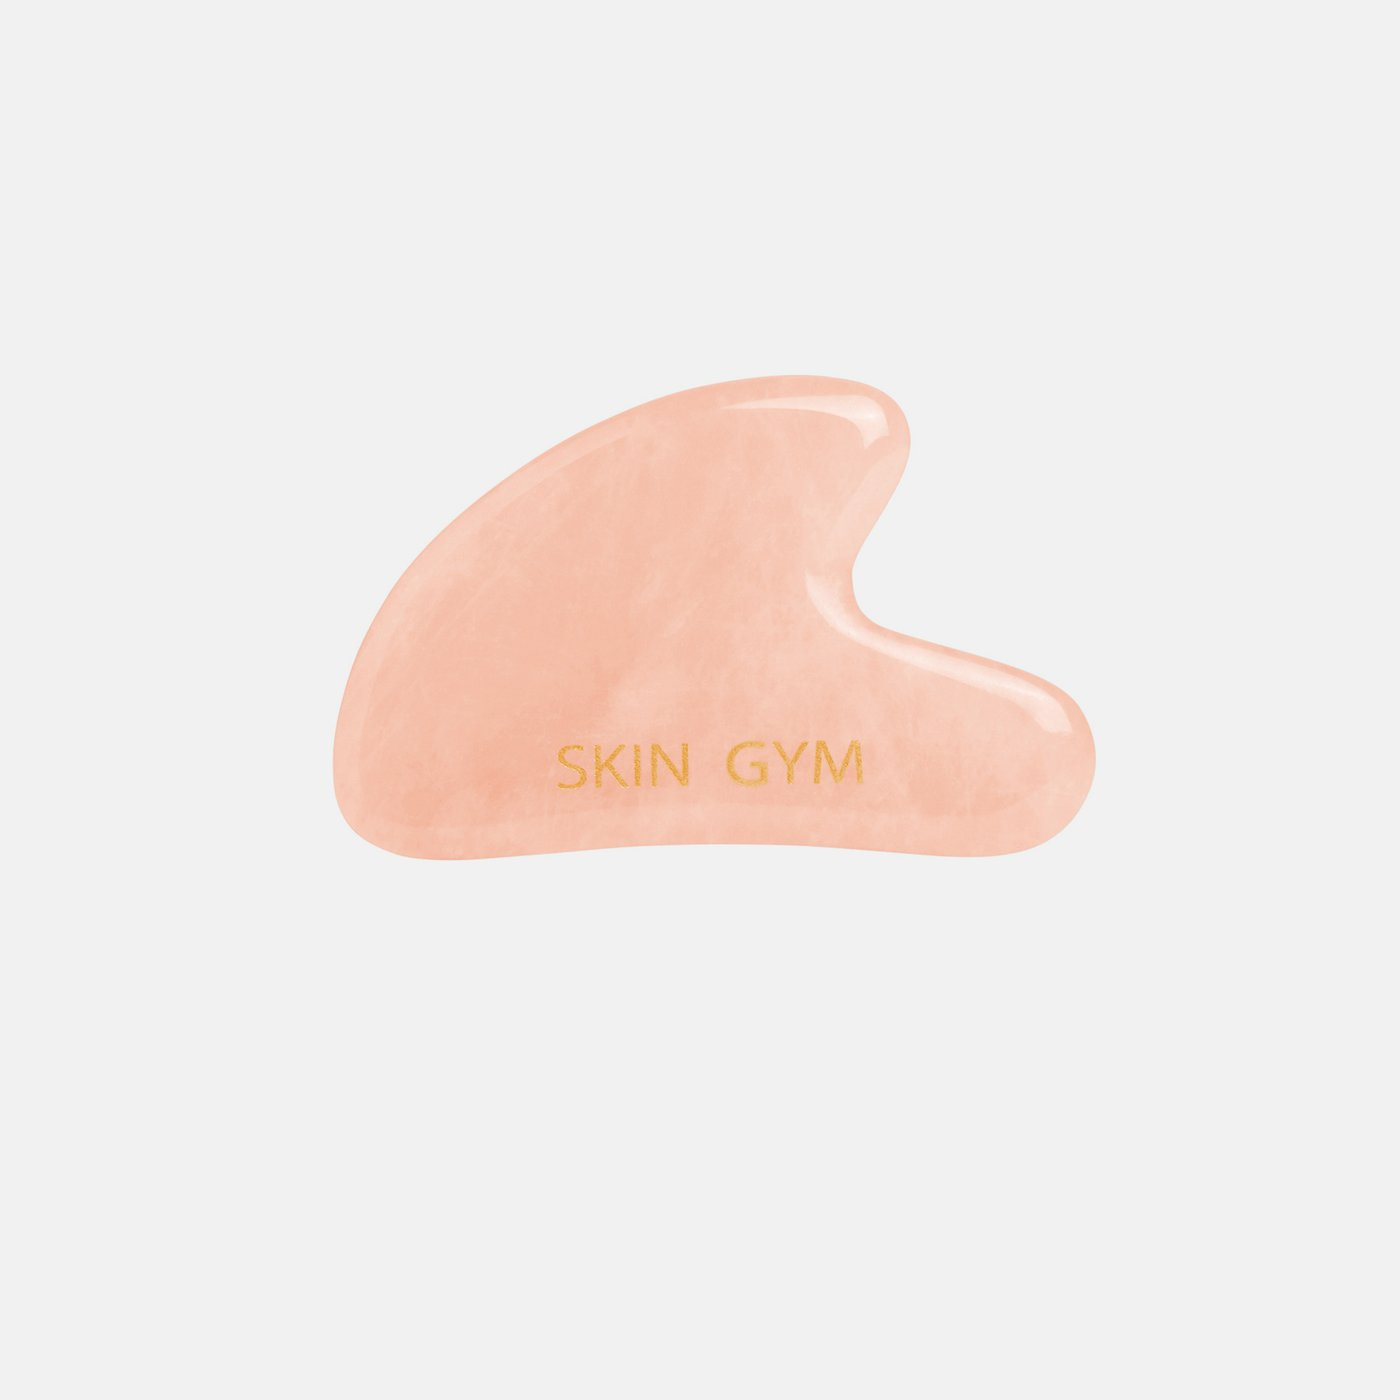 mothers day gift ideas - gua sha